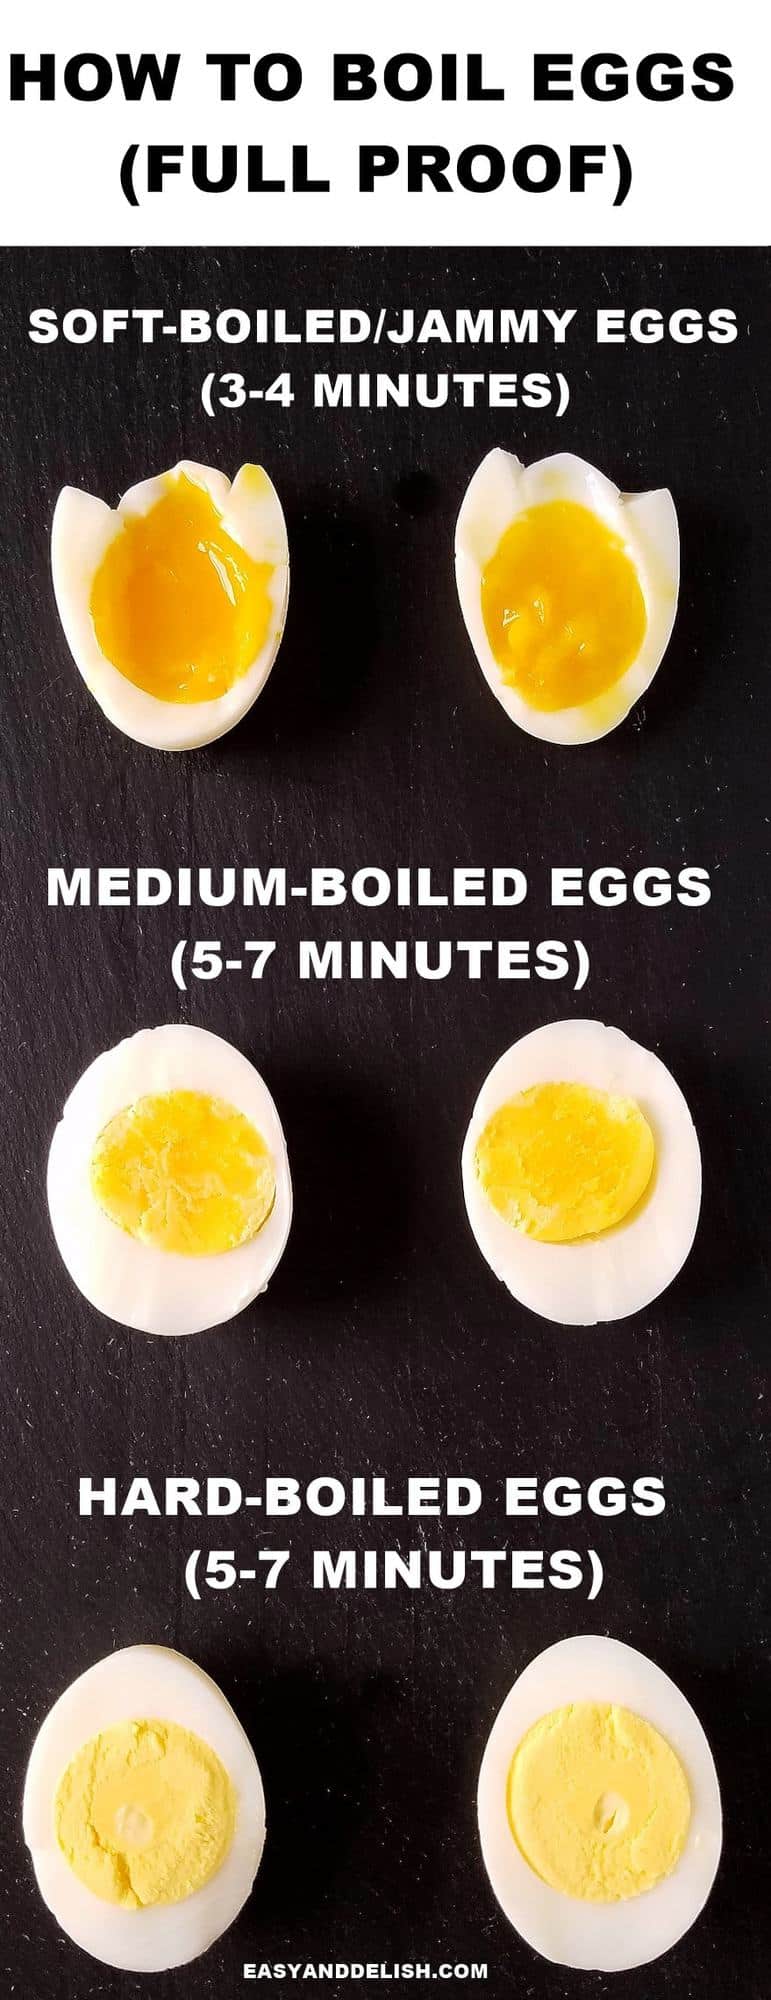 How To Boil an Egg